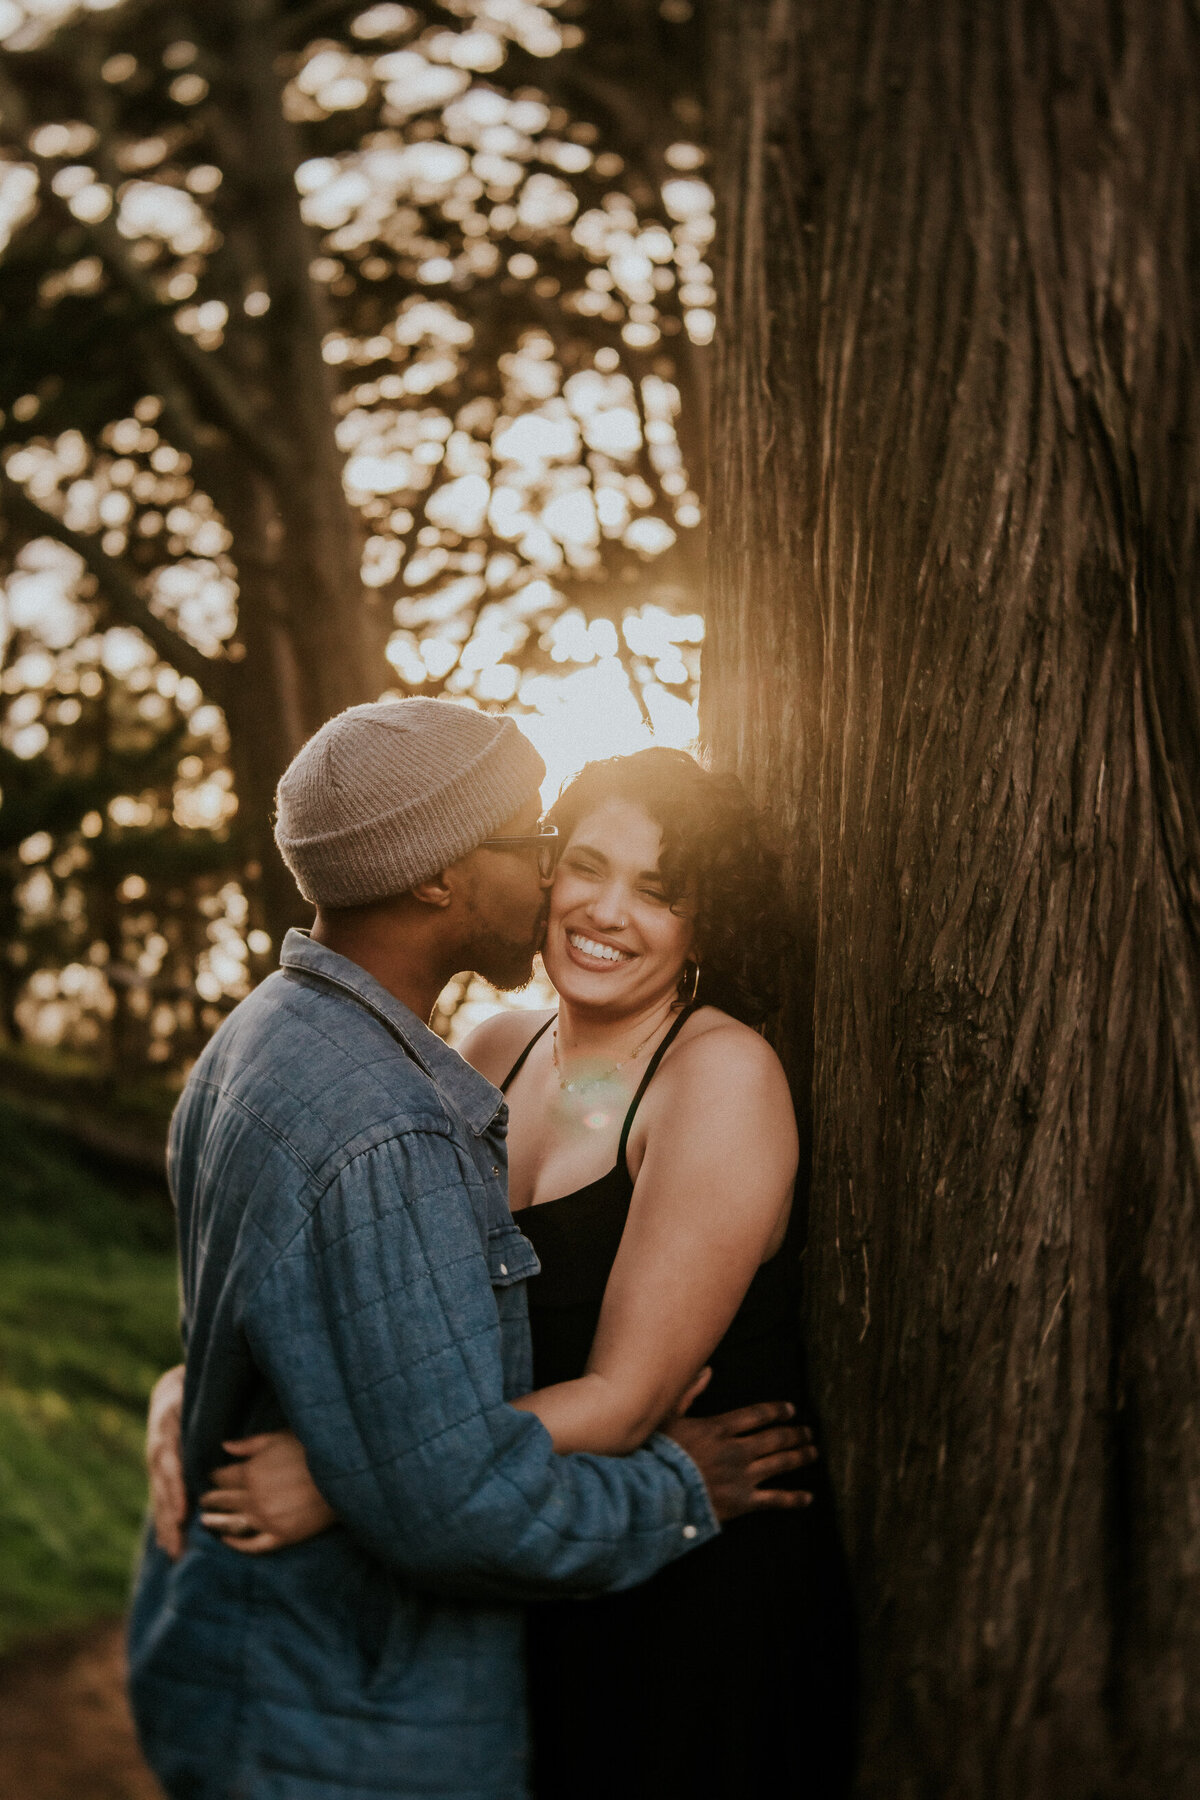 Bay Area couple leans against tree and man kisses women's cheek.  She wears black dress and he is in a jean shirt and beanie